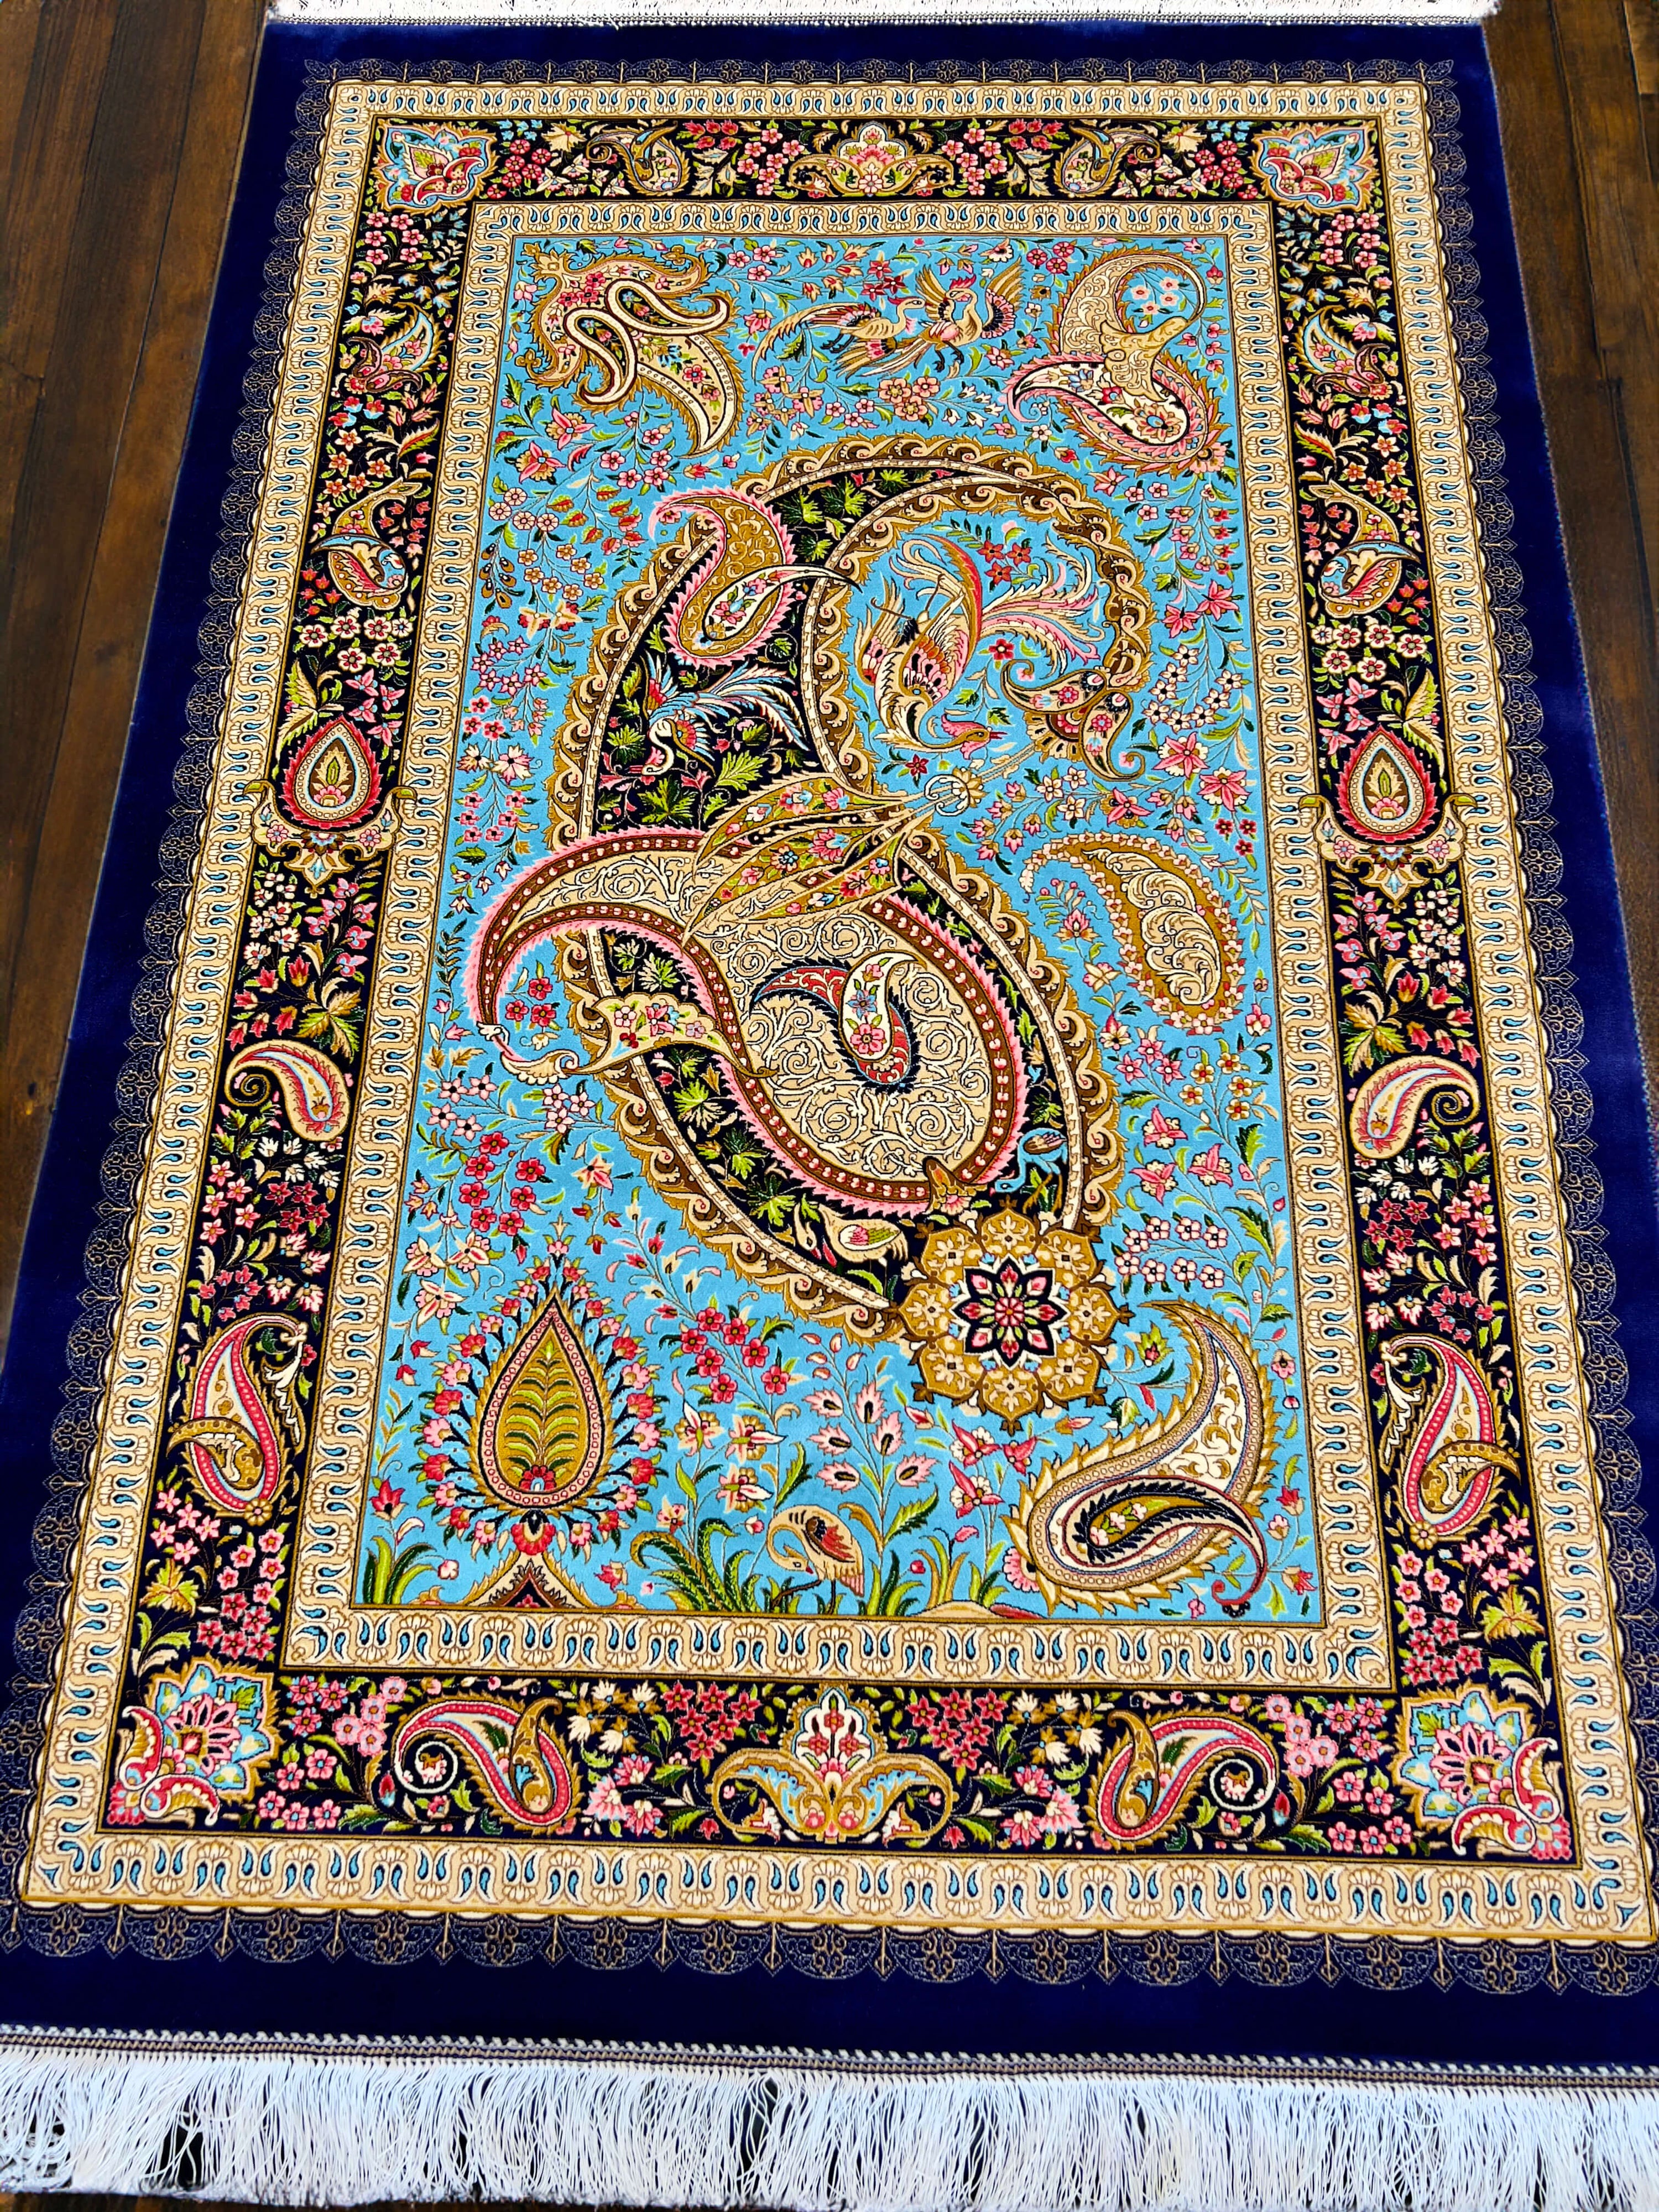 Blue Turquoise Paisley Boteh Silk Persian Area Rug